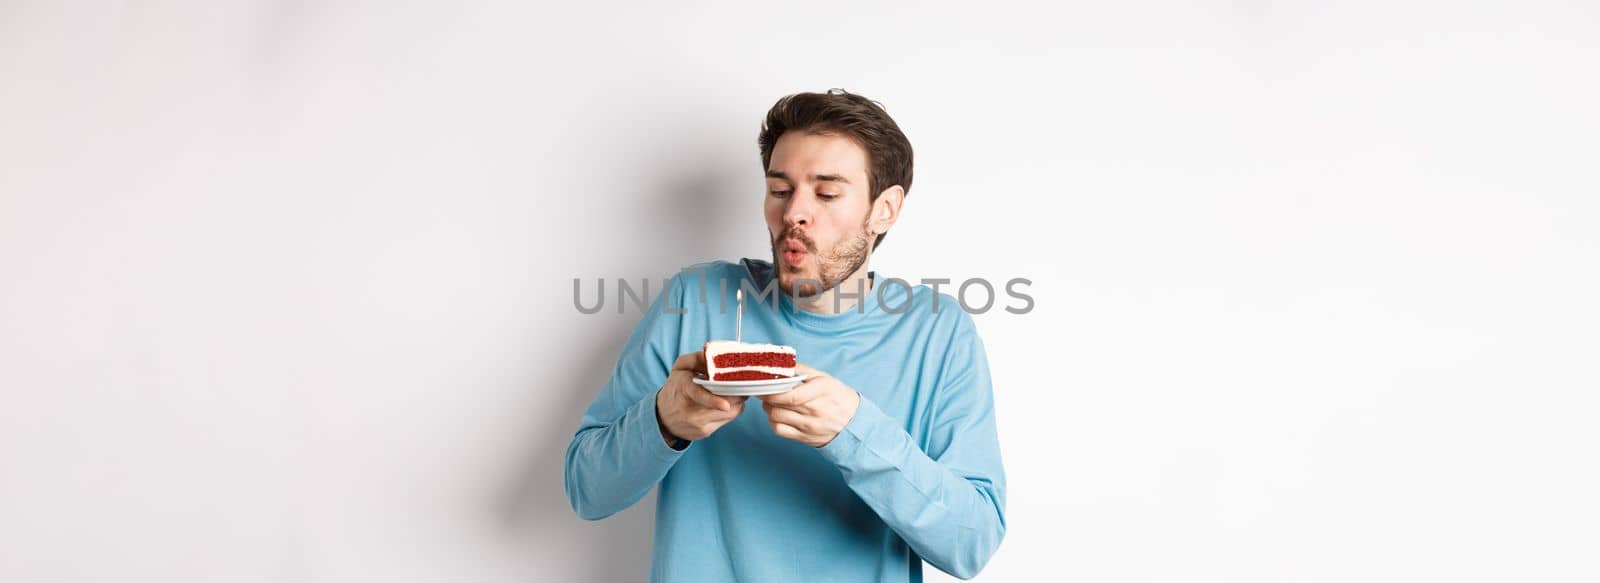 Celebration and holidays concept. Happy young man blowing candle on birthday cake, making wish on bday, standing over white background.